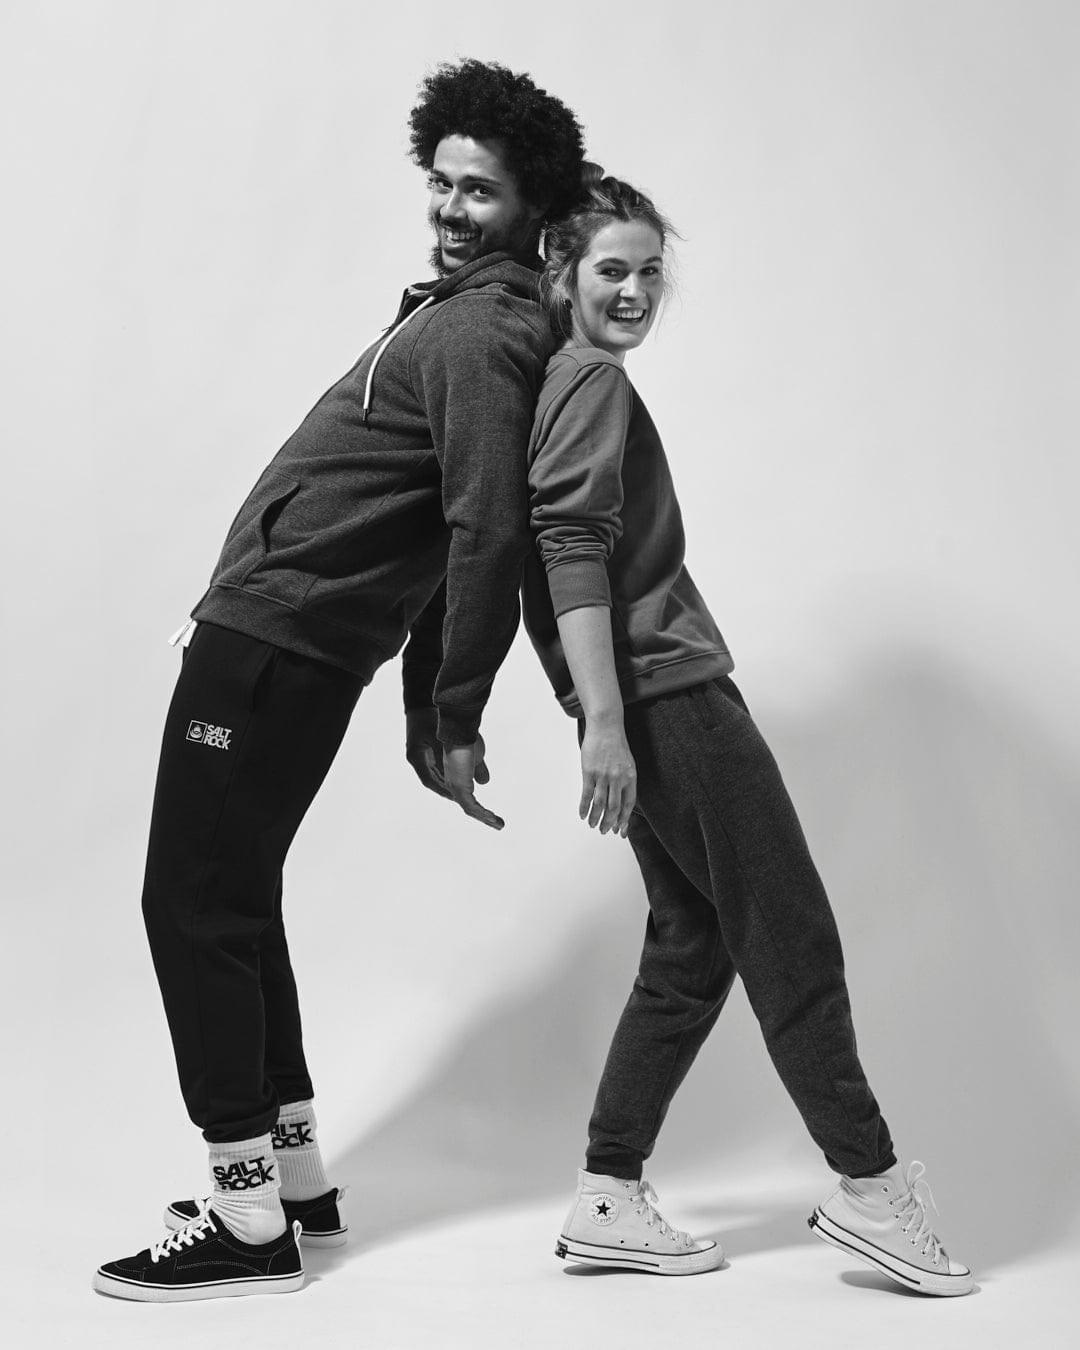 A black and white photo of a man and woman posing in Saltrock Joggers from the Velator - Womens Jogger - Blue range, showcasing Saltrock branding.